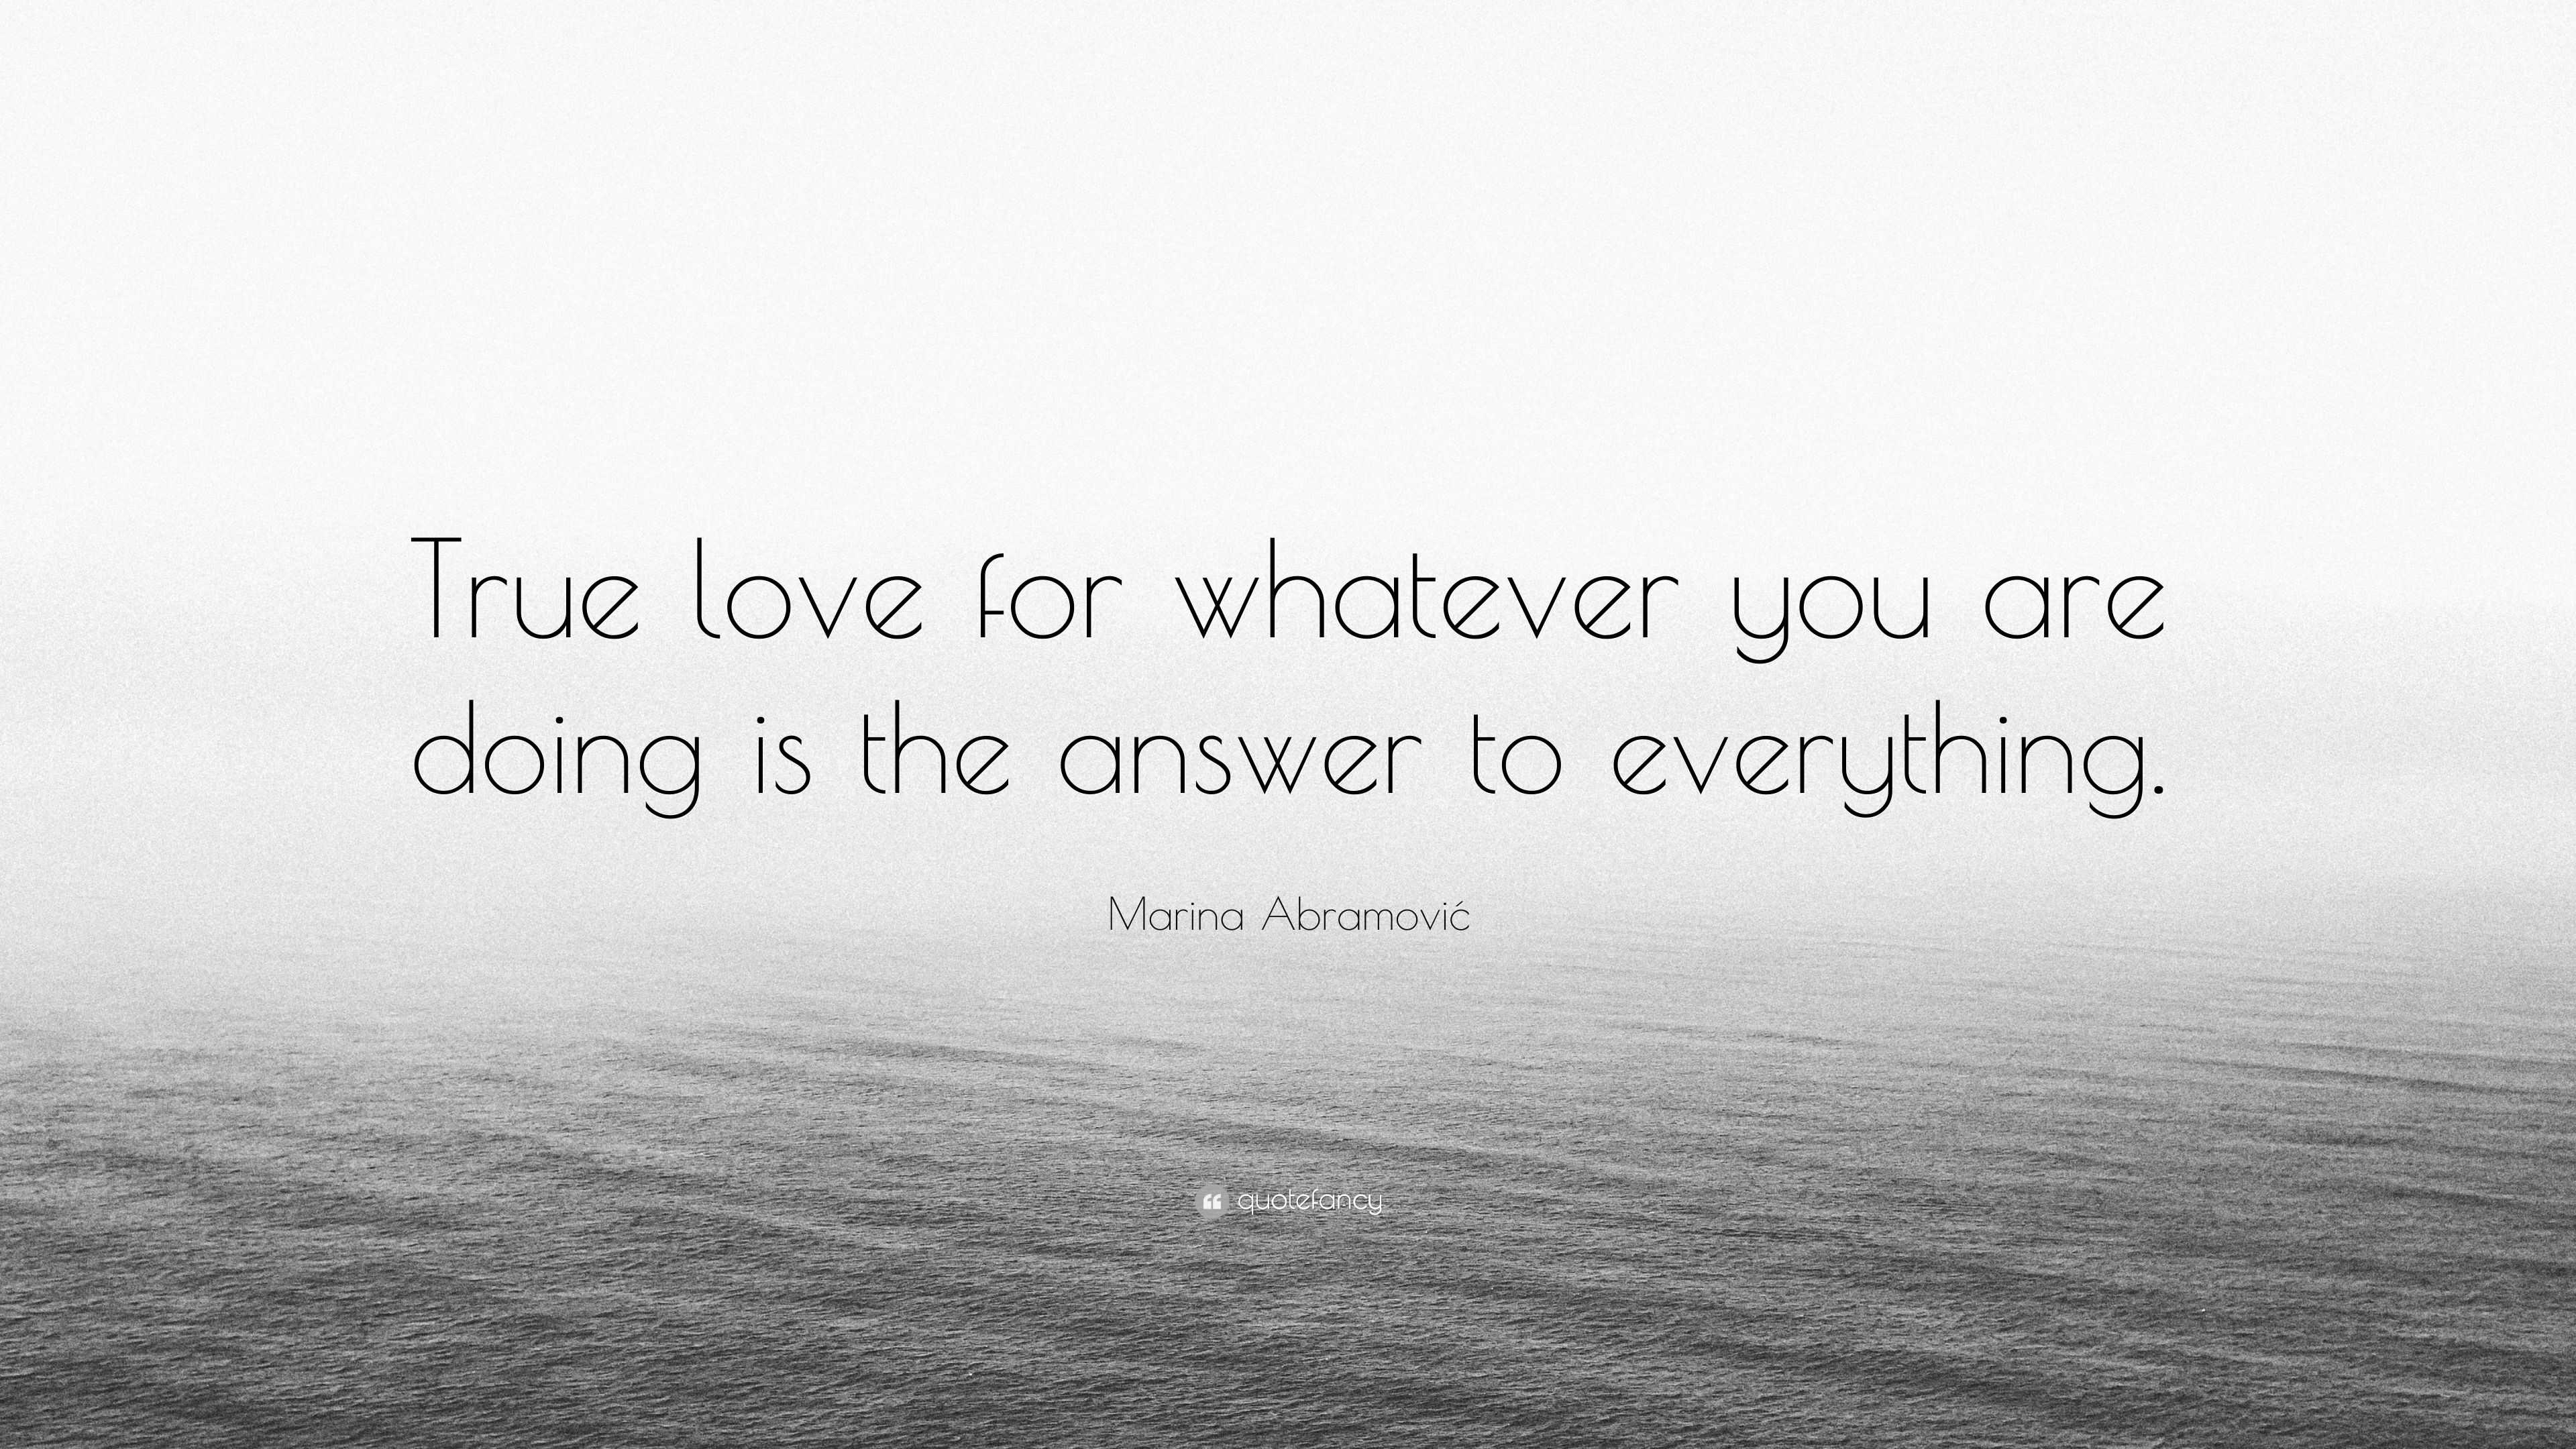 Marina Abramovic Quote True Love For Whatever You Are Doing Is The Answer To Everything